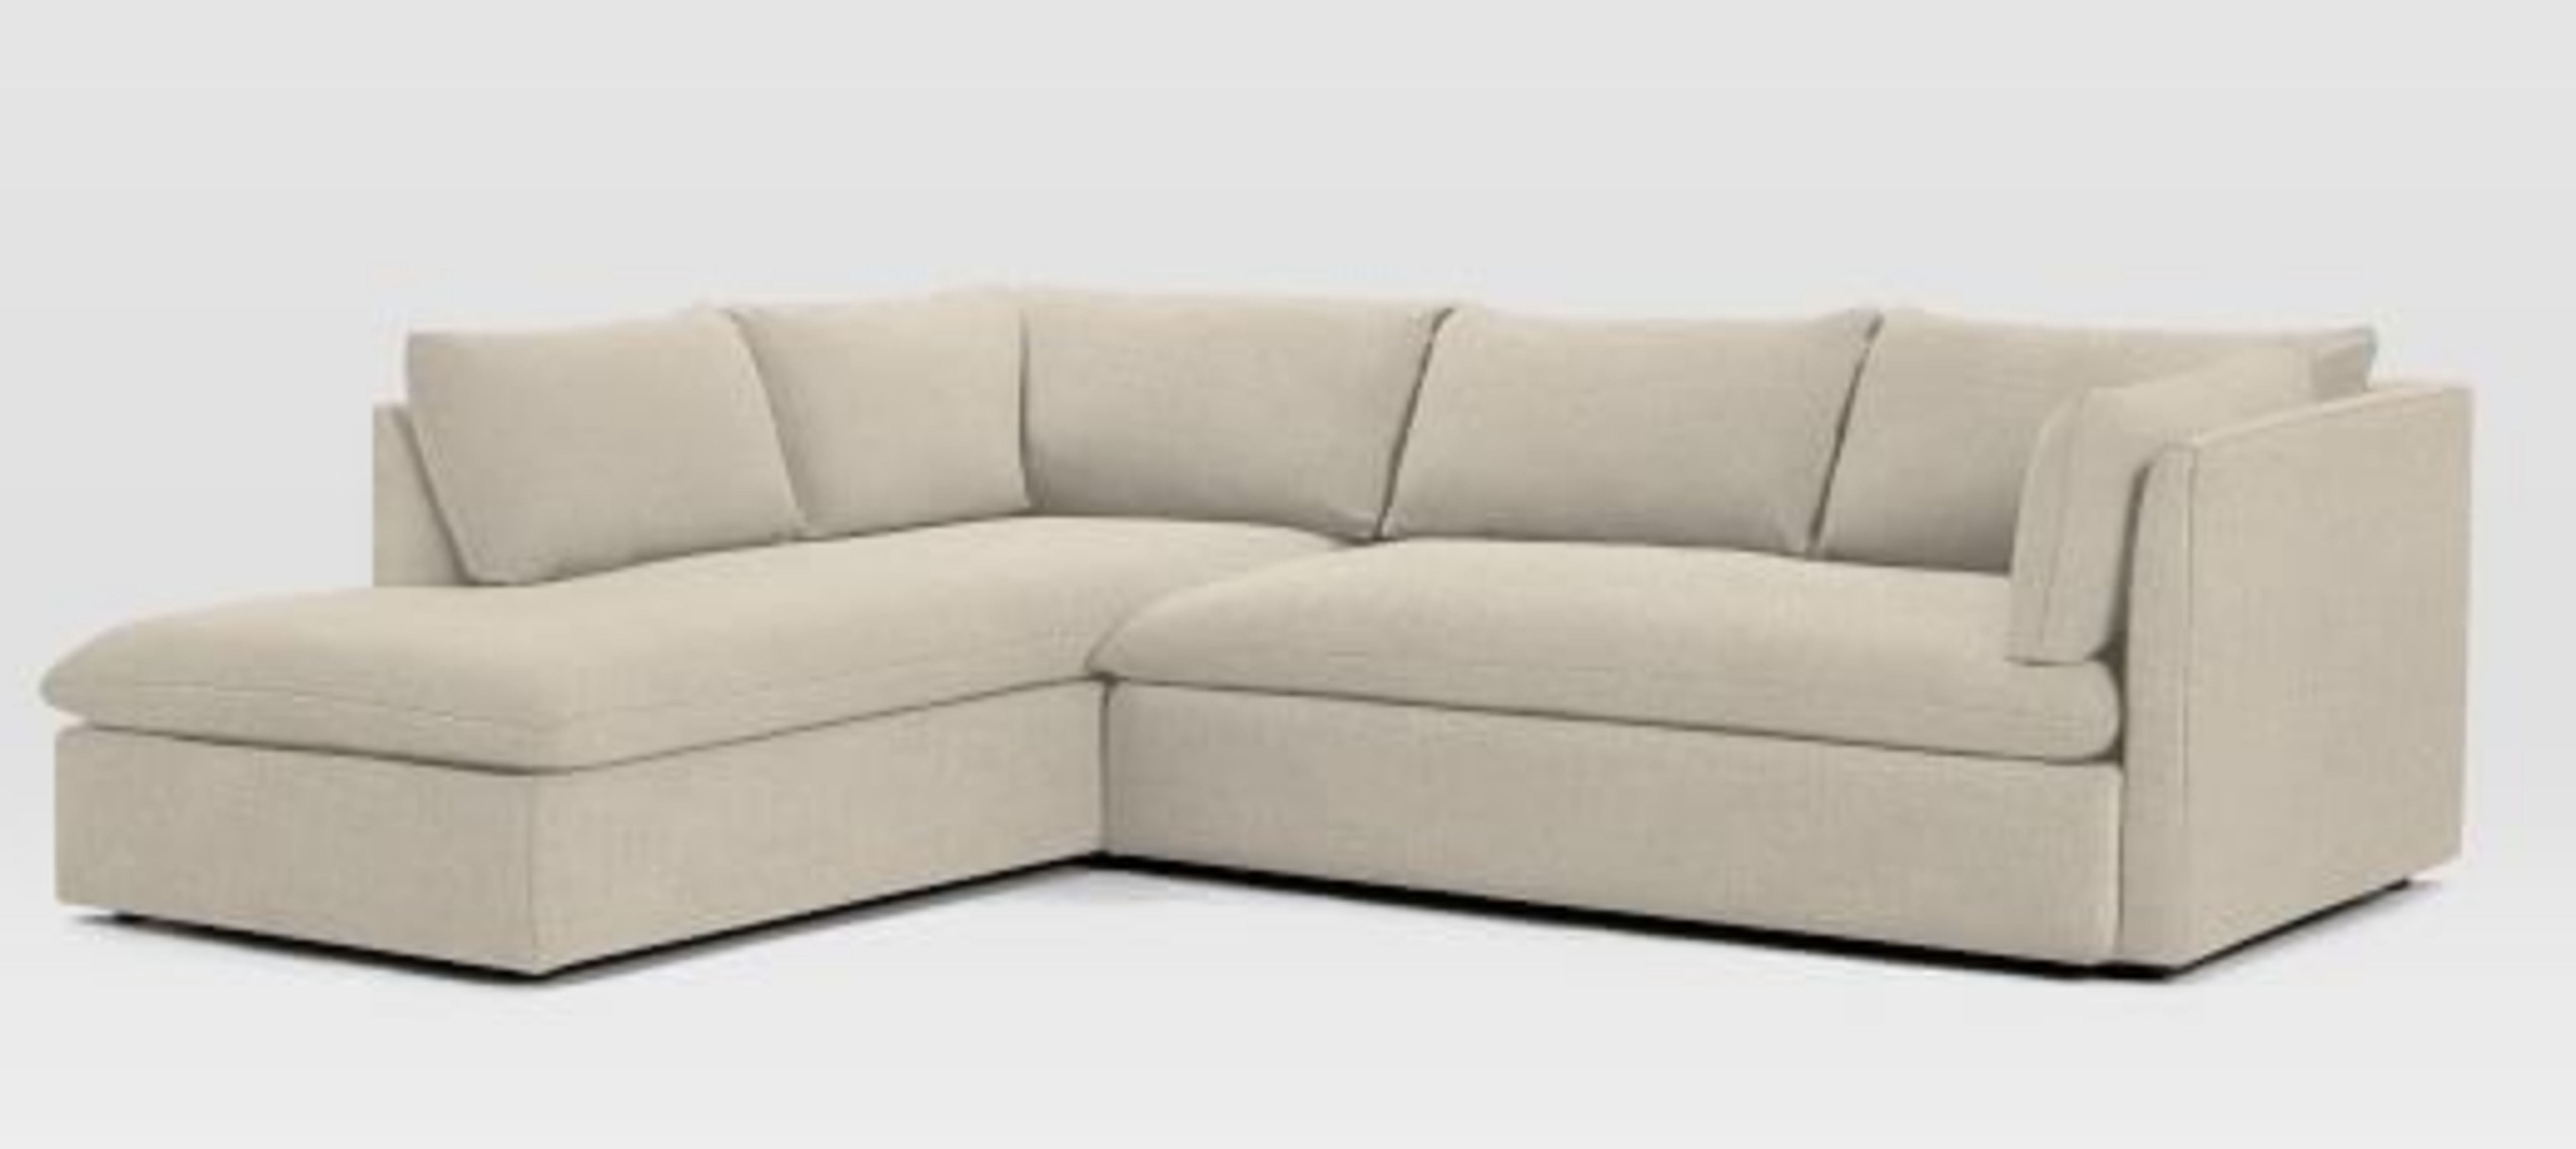 Shelter 2-Piece Terminal Chaise Sectional - Left Chaise - Pebble Weave Oatmeal - West Elm